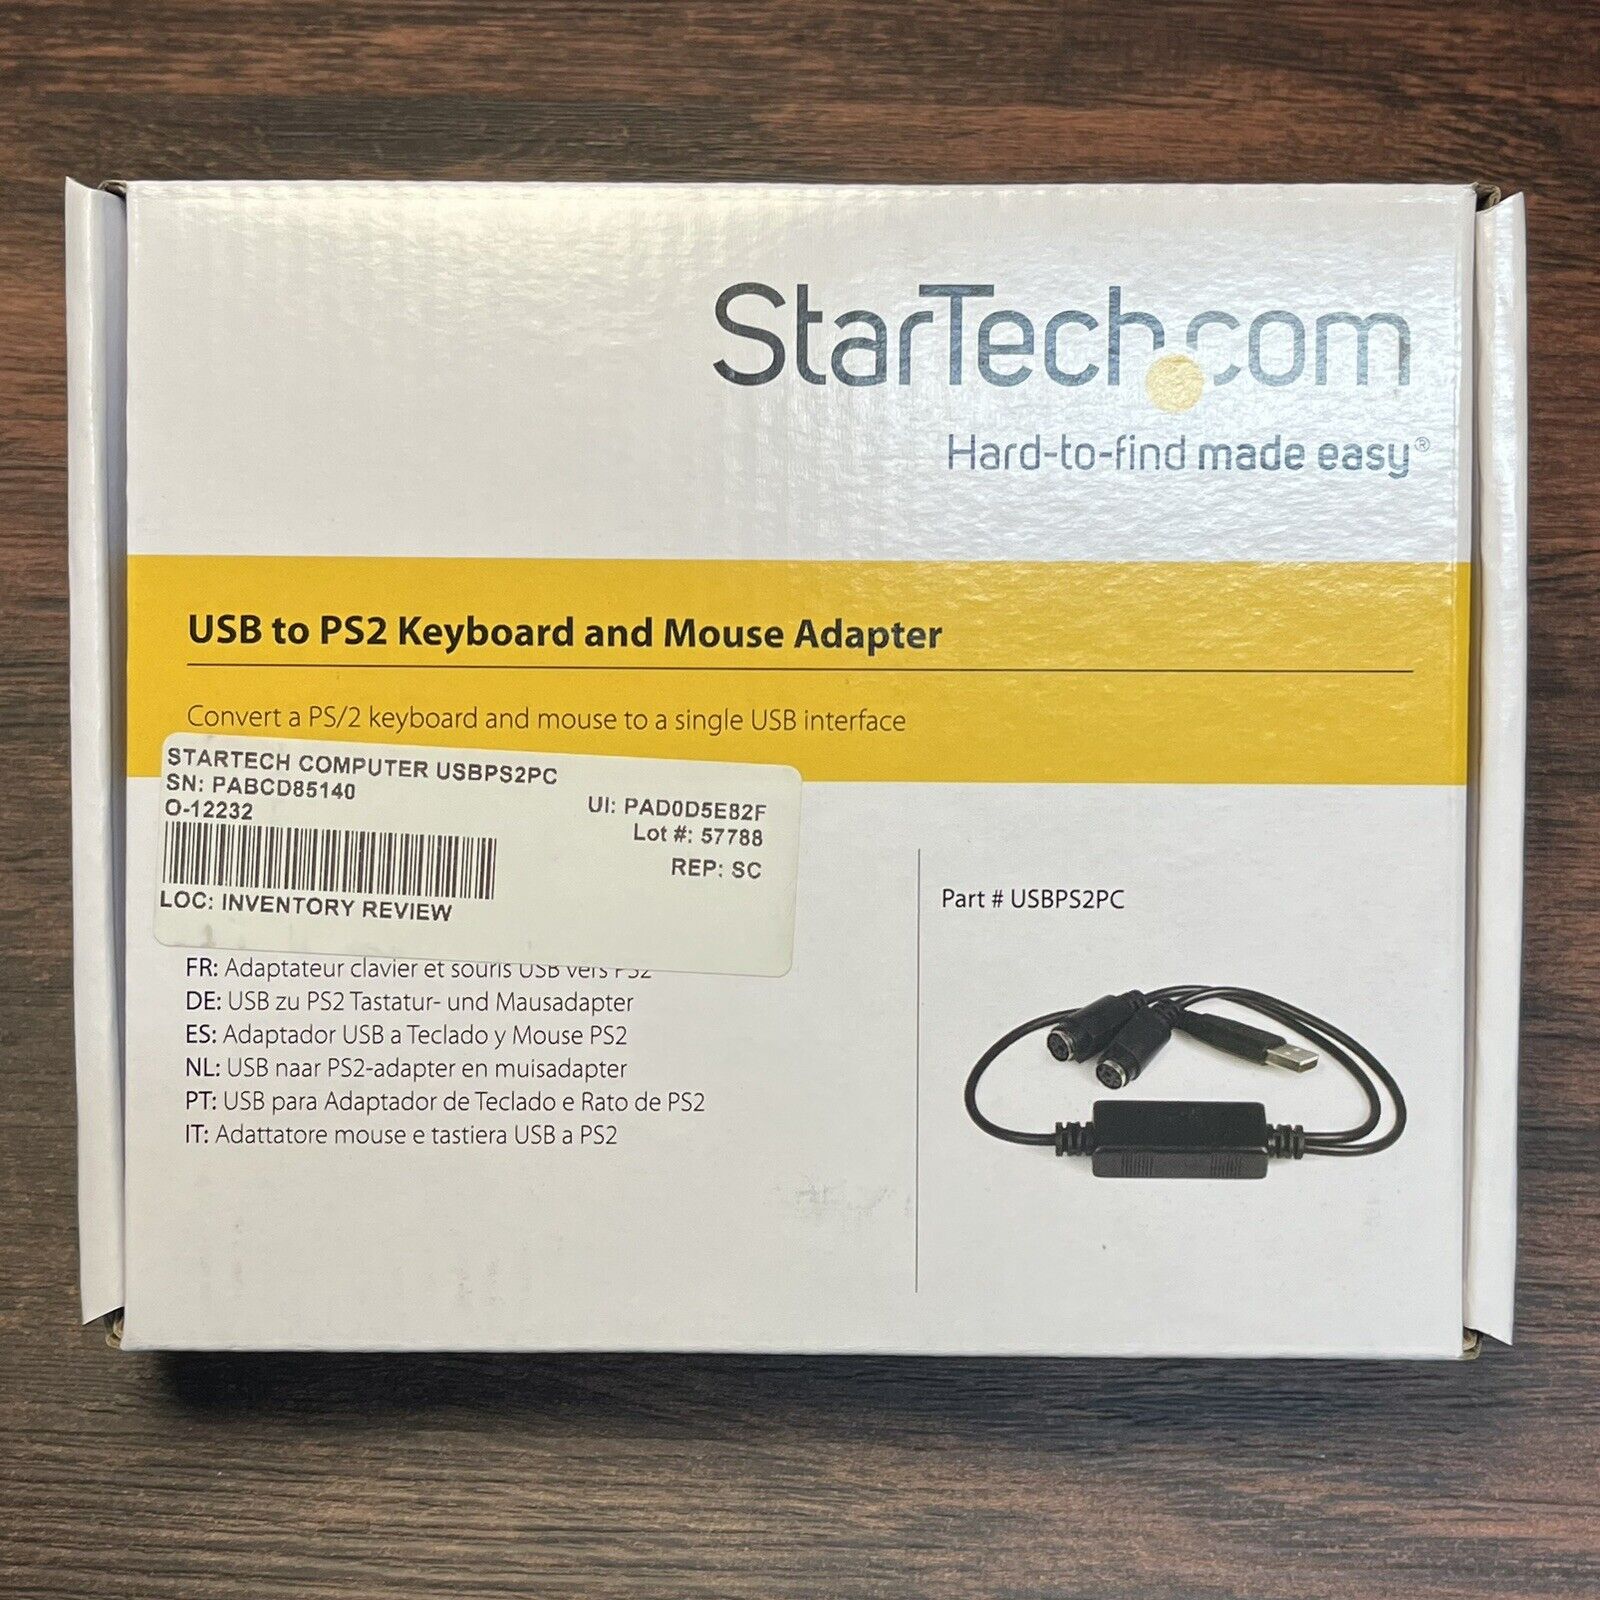 StarTech USB to PS2 Keyboard and Mouse Adapter USBPS2PC